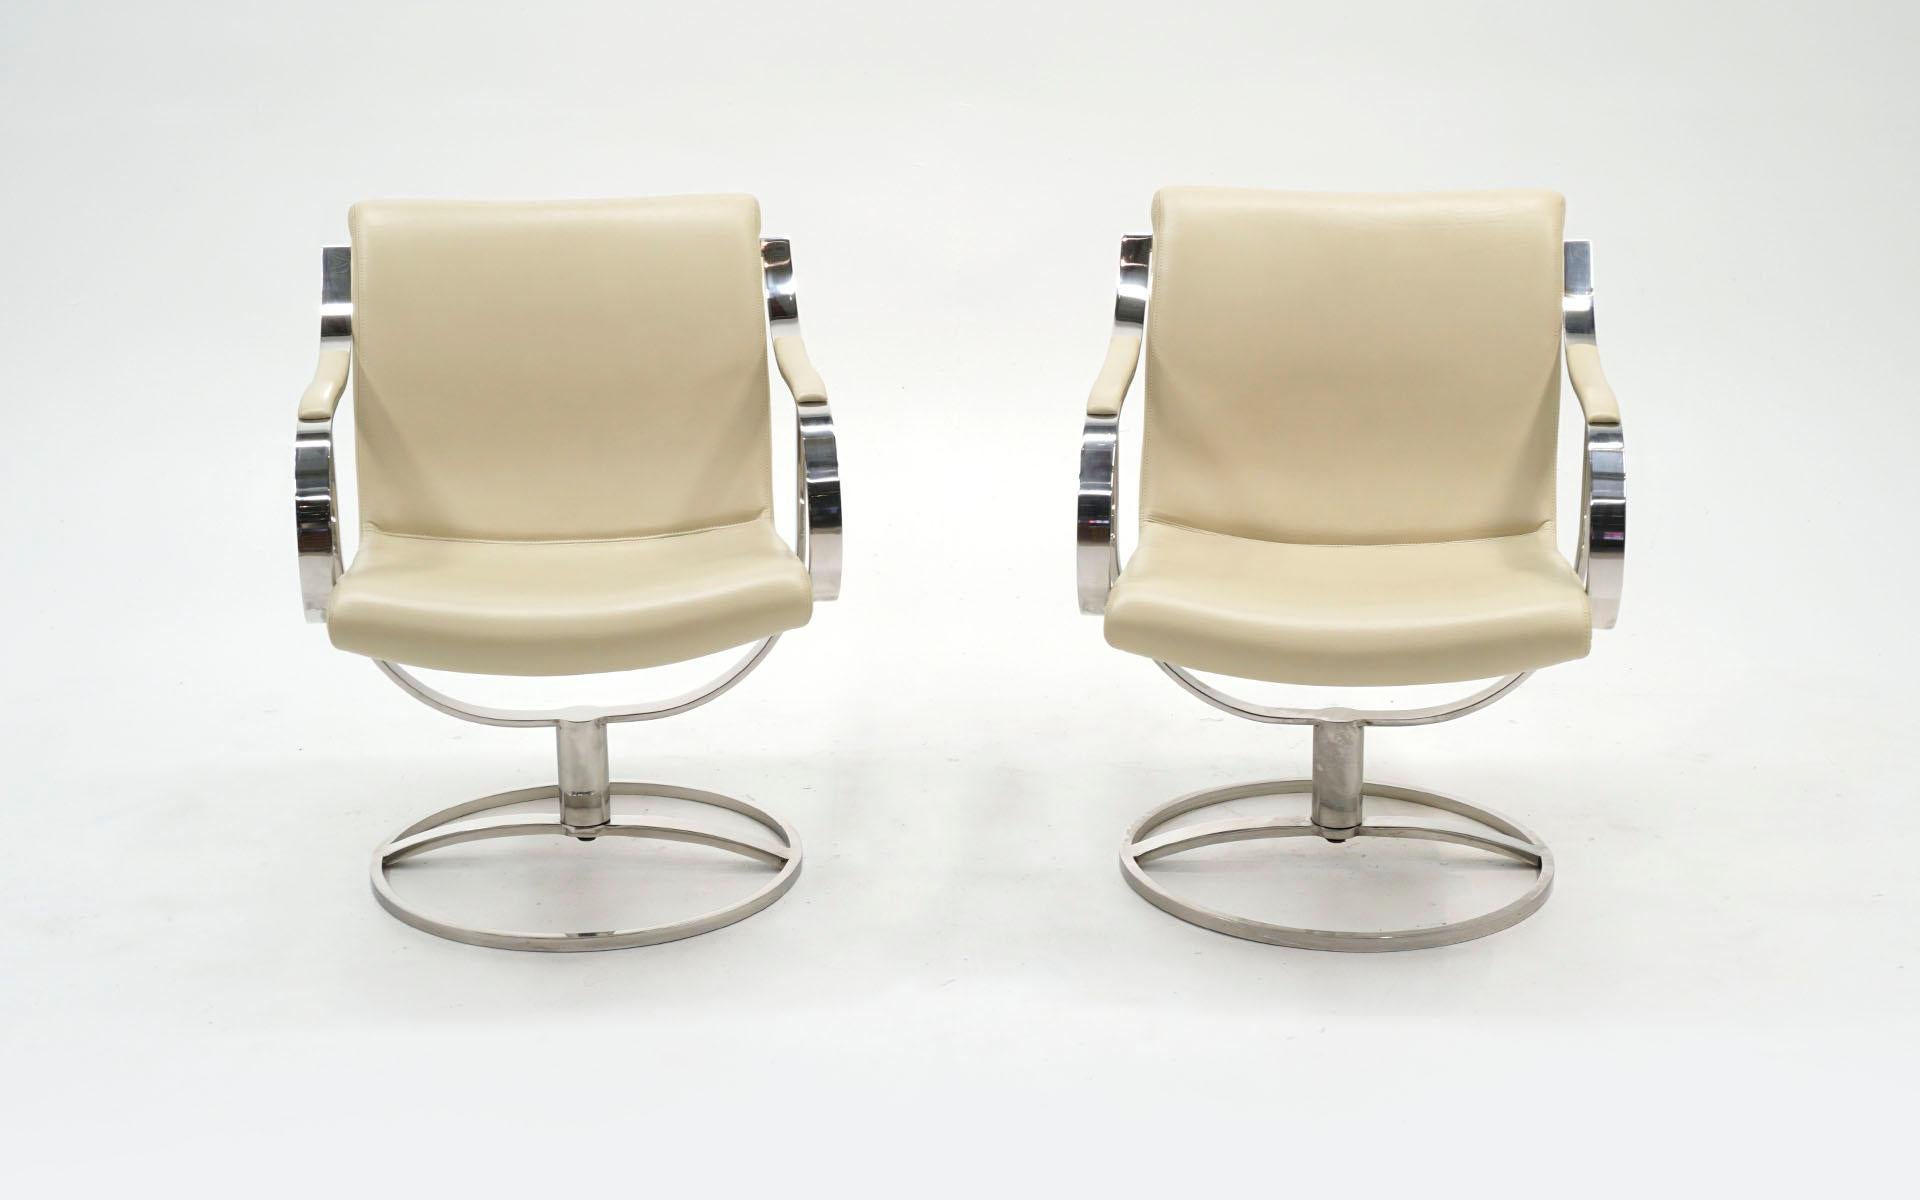 Pair of swivel armchairs designed by Gardner Leaver for Steelcase.  Ivory leather with frames of heavy polished stainless steel, not chrome.  Both chairs are in very good to excellent condition showing little to no wear to the leather or to the